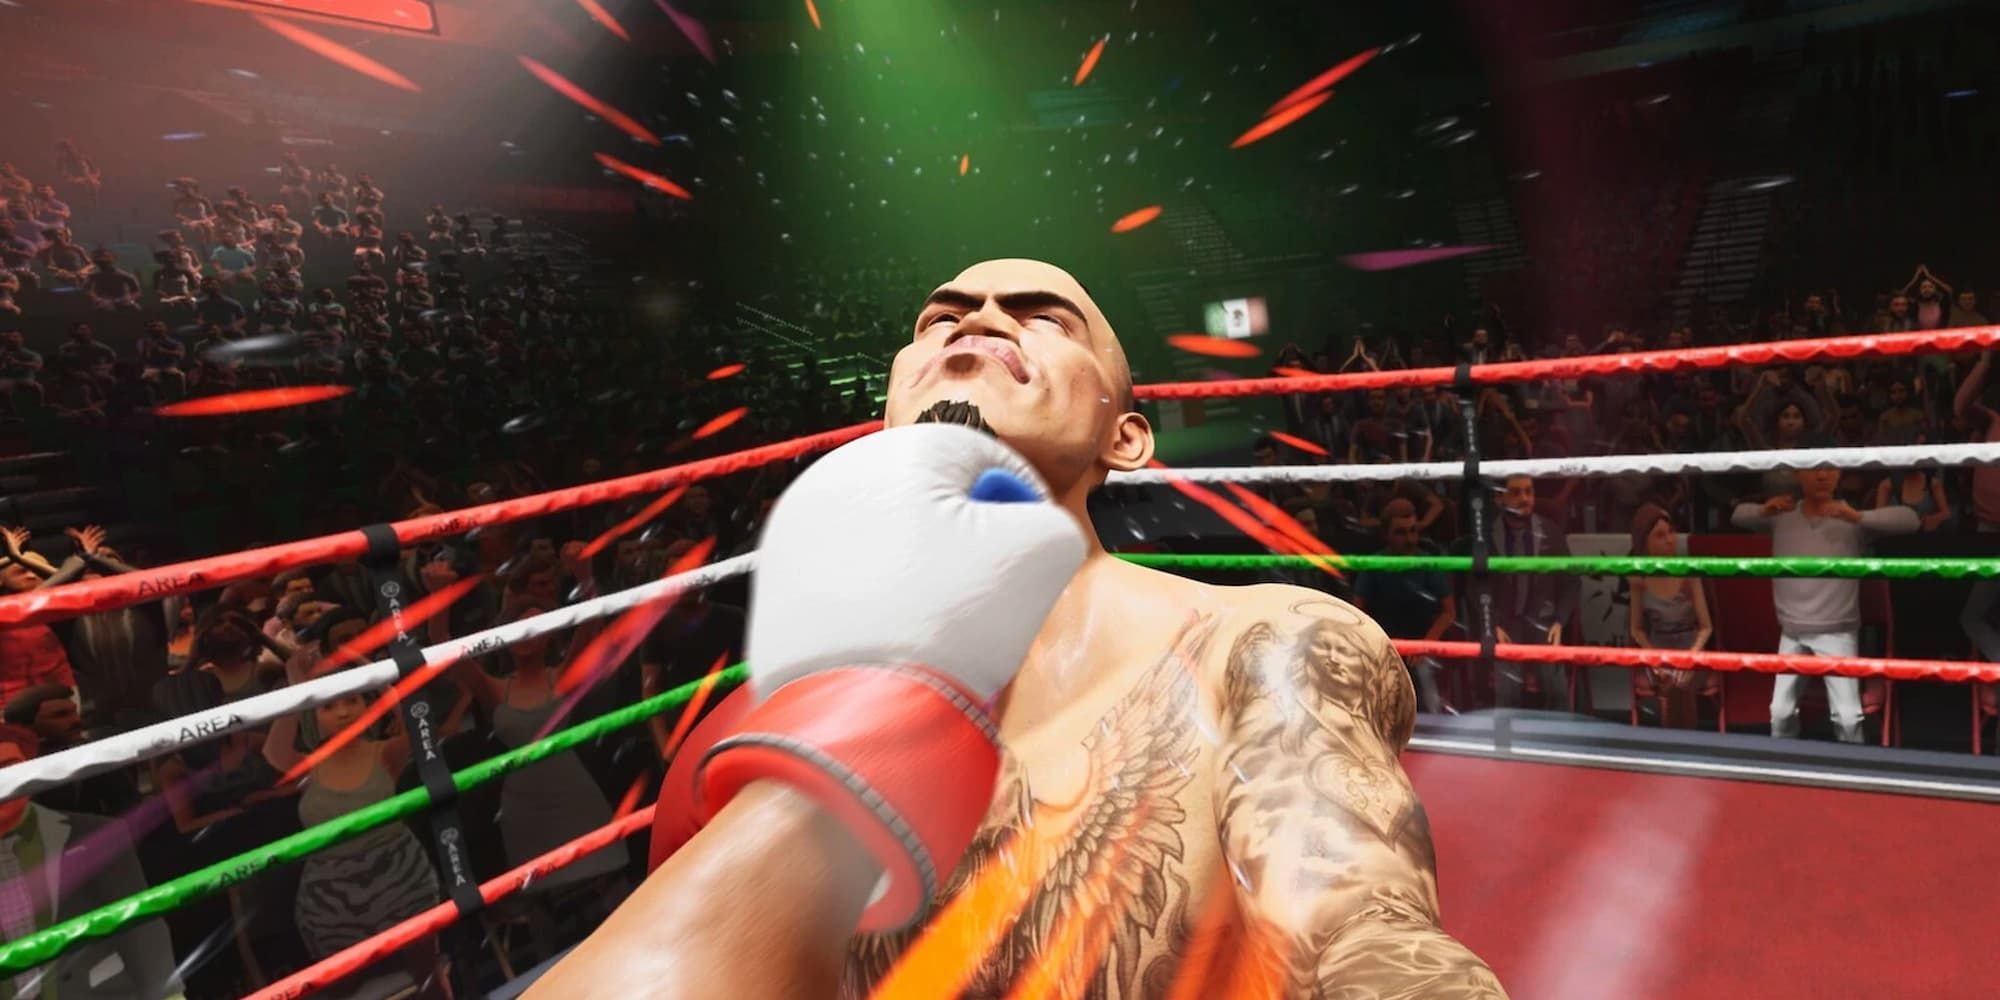 The player delivers a devastating blow to his opponent in Creed: Rise To Glory.